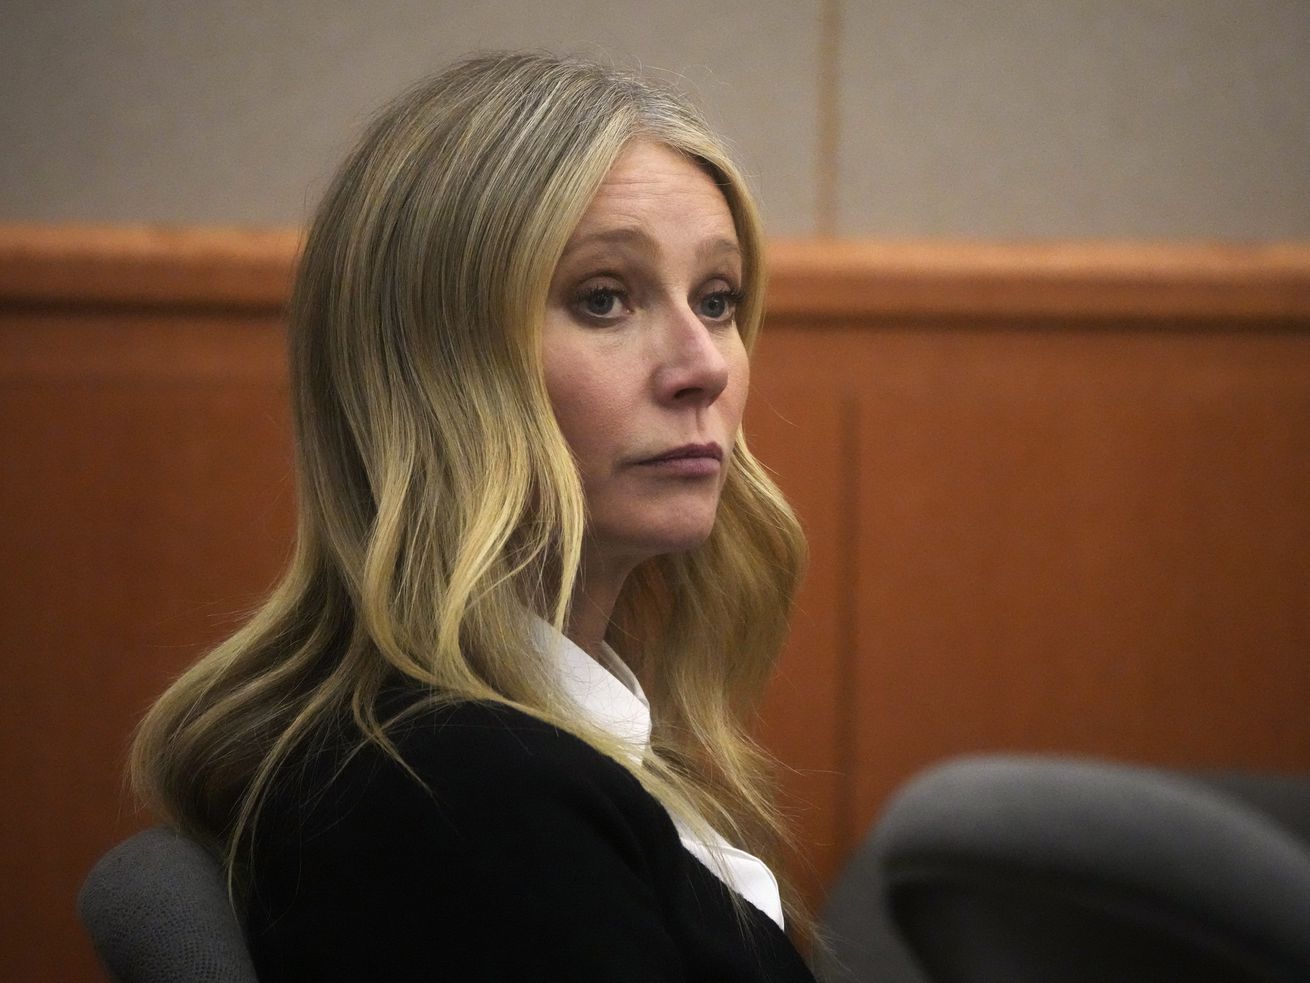 Actress Gwyneth Paltrow siting in a courtroom.